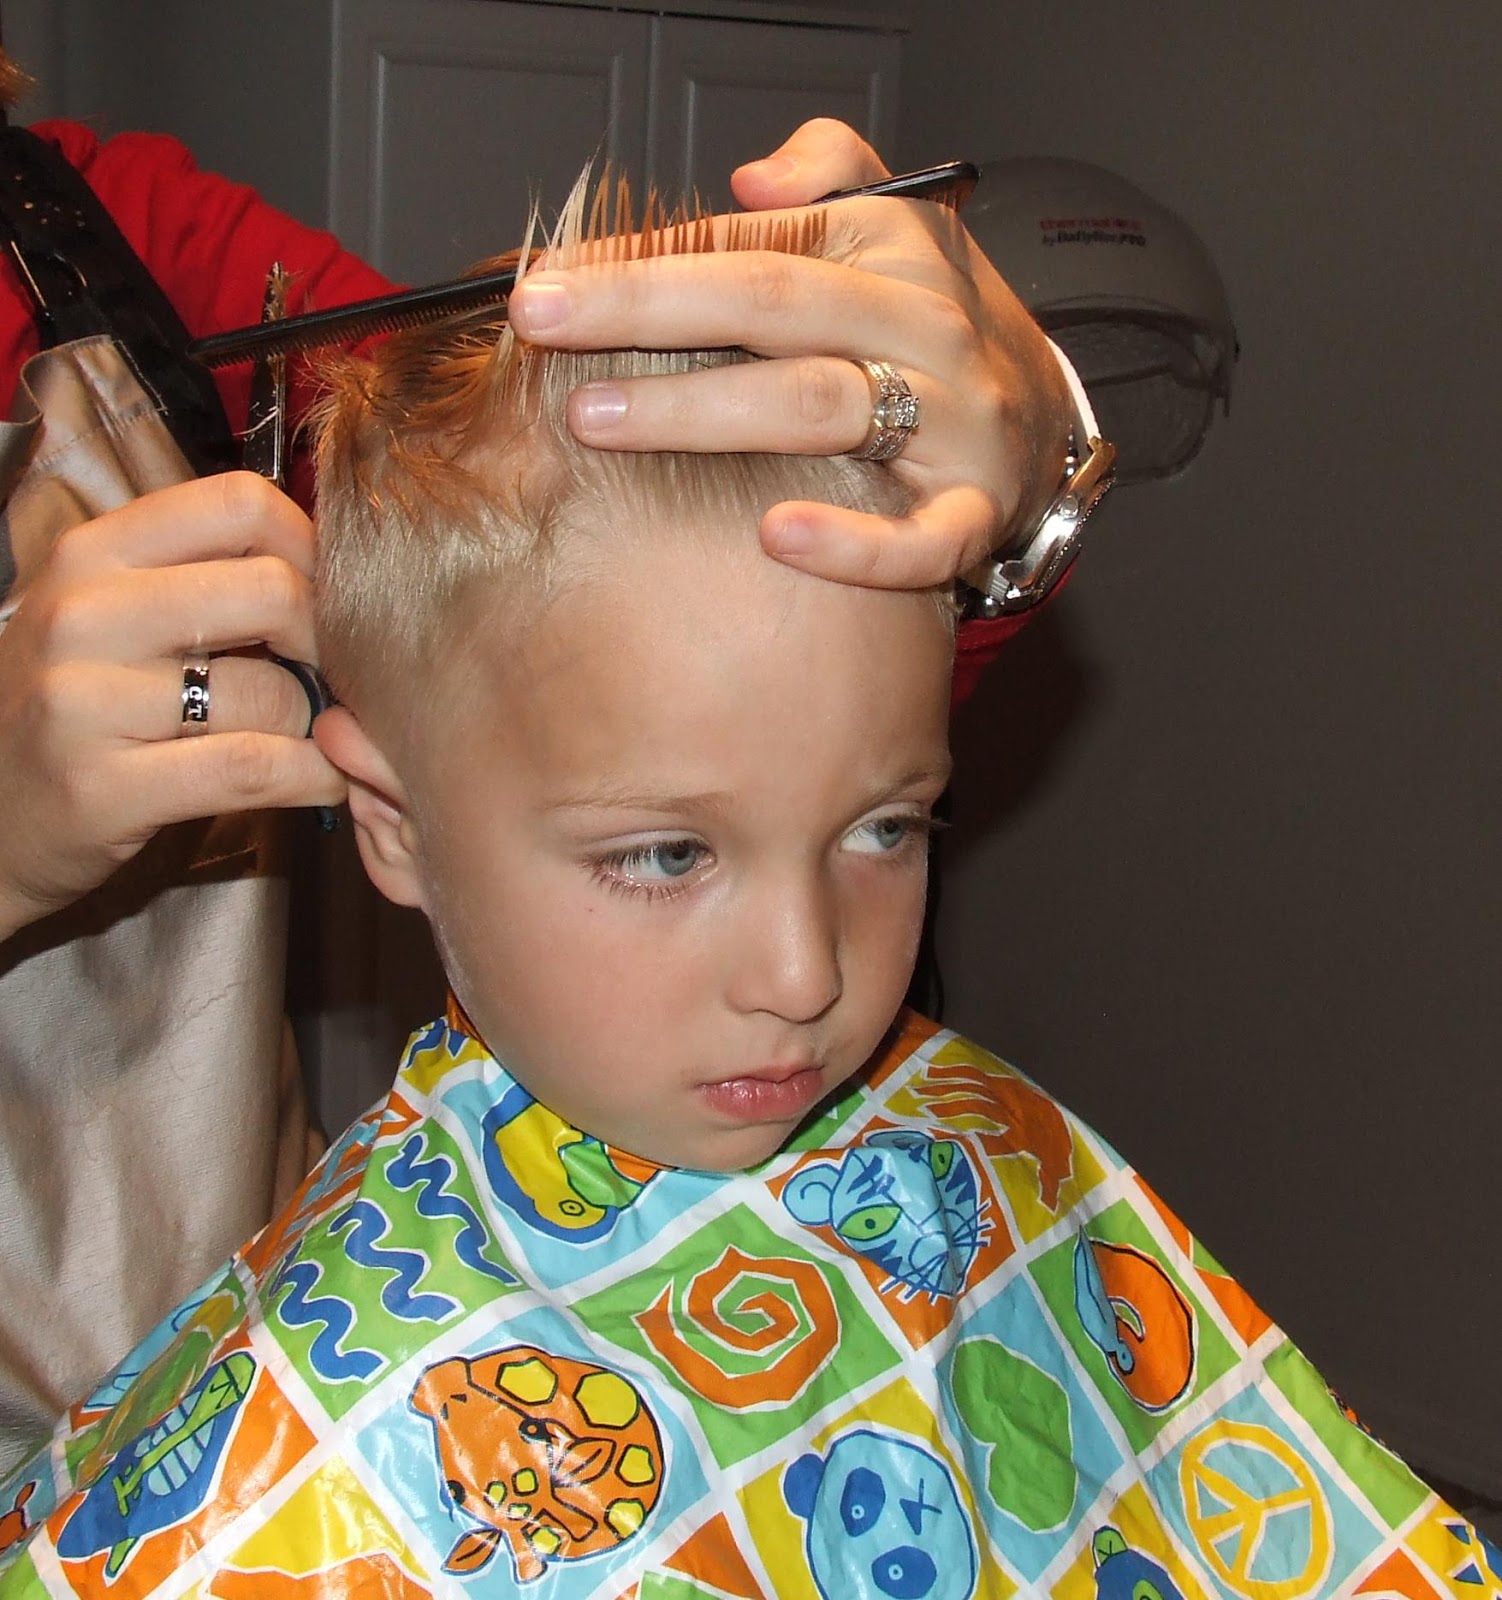 Simply Everthing I Love...: How To Cut Boys Hair The Professional way